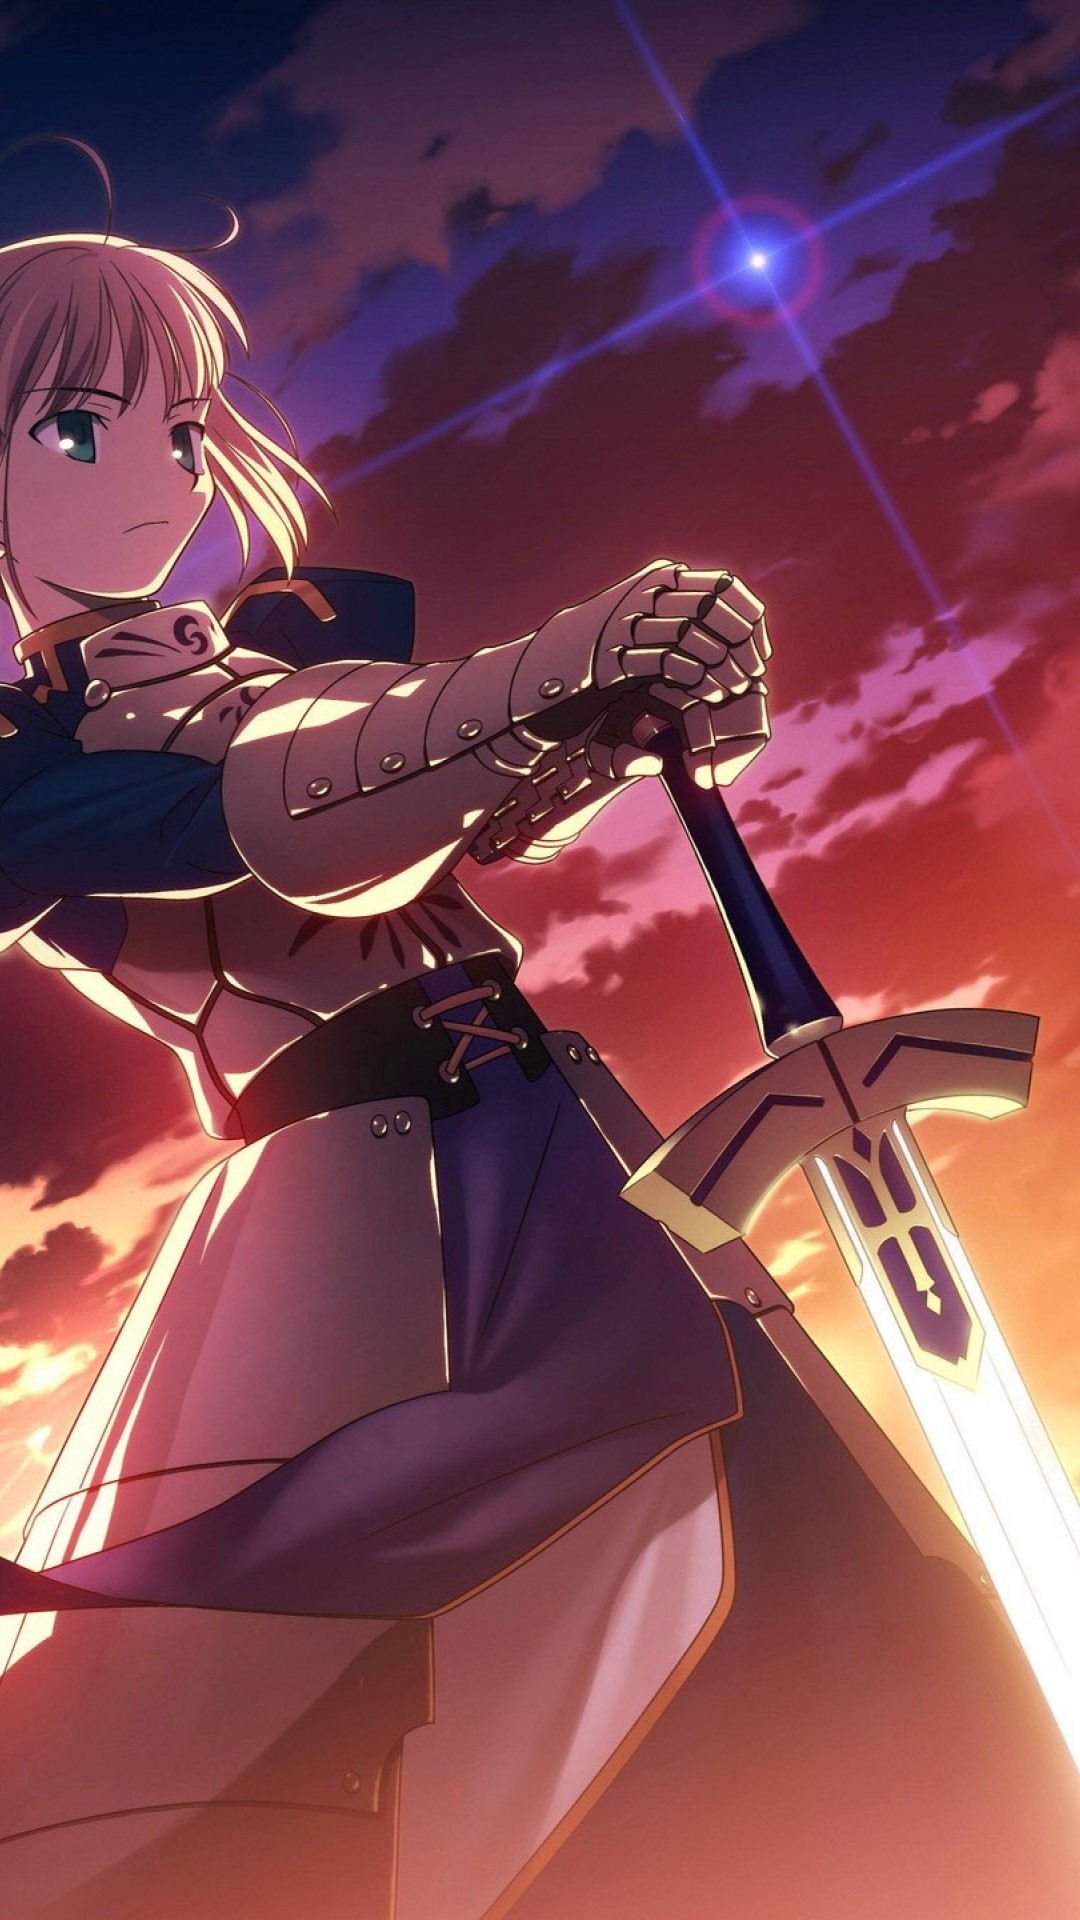 Fate Stay Night Saber Hd Wallpaper For Desktop And Mobiles Iphone 6 6s Plus Hd Wallpaper Wallpapers Net